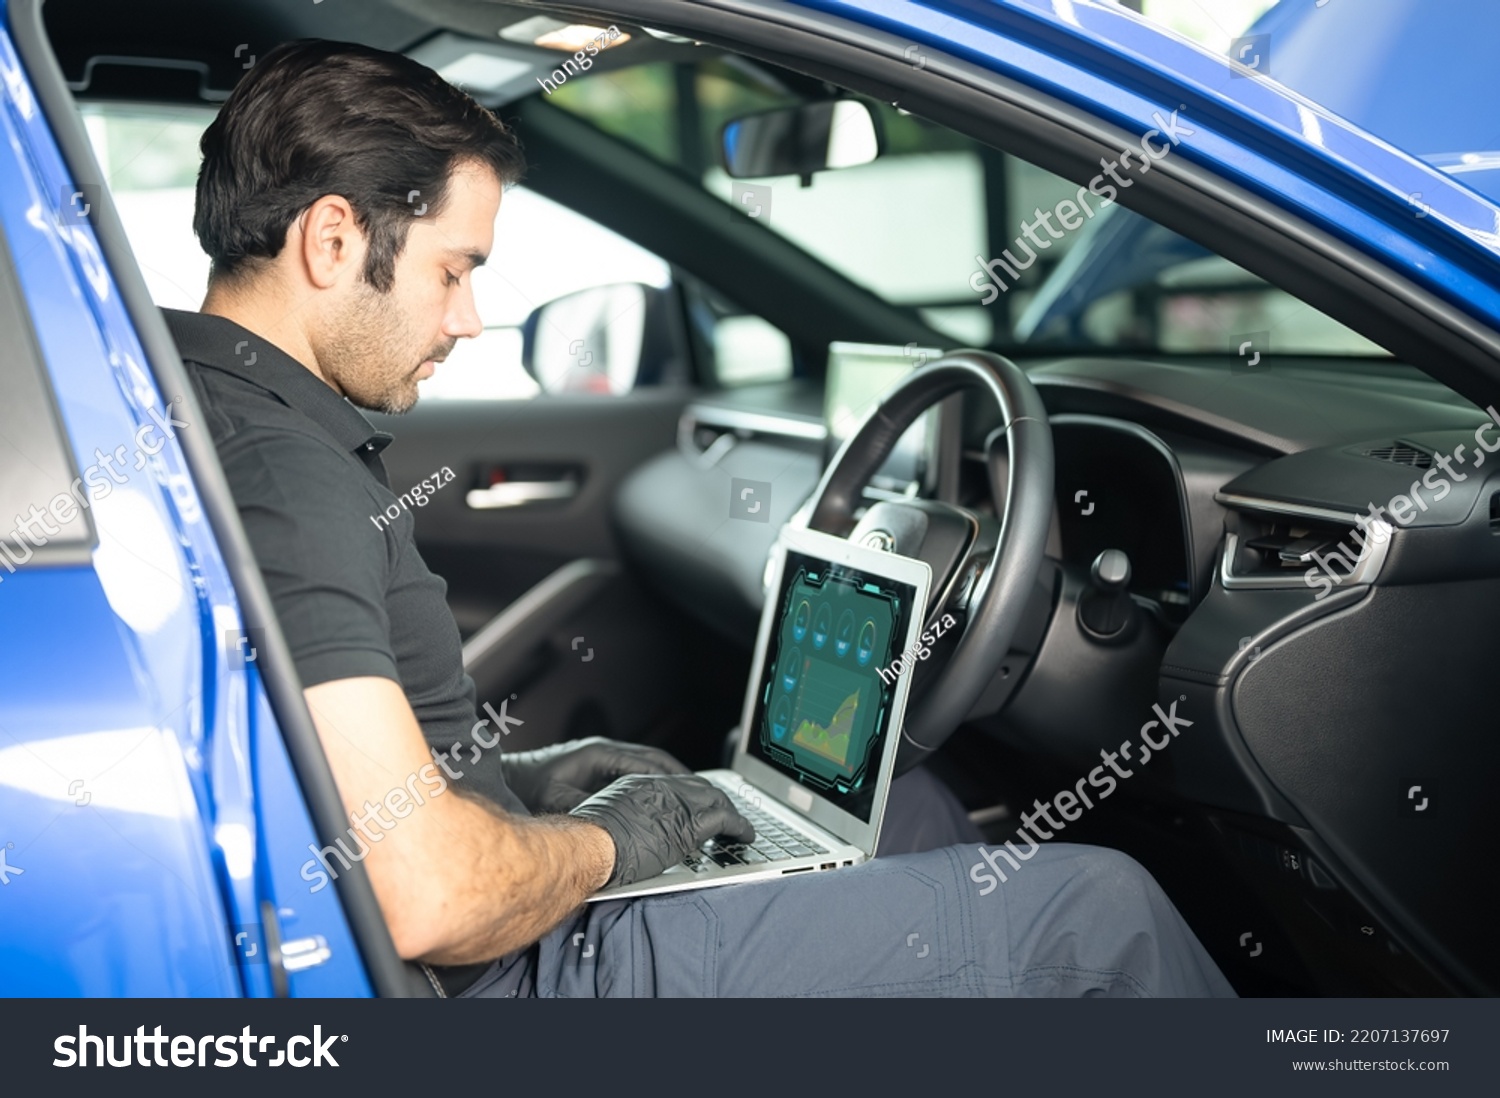 Mechanic AsianArab man using laptop computer examining tuning fixing repairing car engine automobile vehicle parts using tools equipment in workshop garage support service in overall work uniform #2207137697